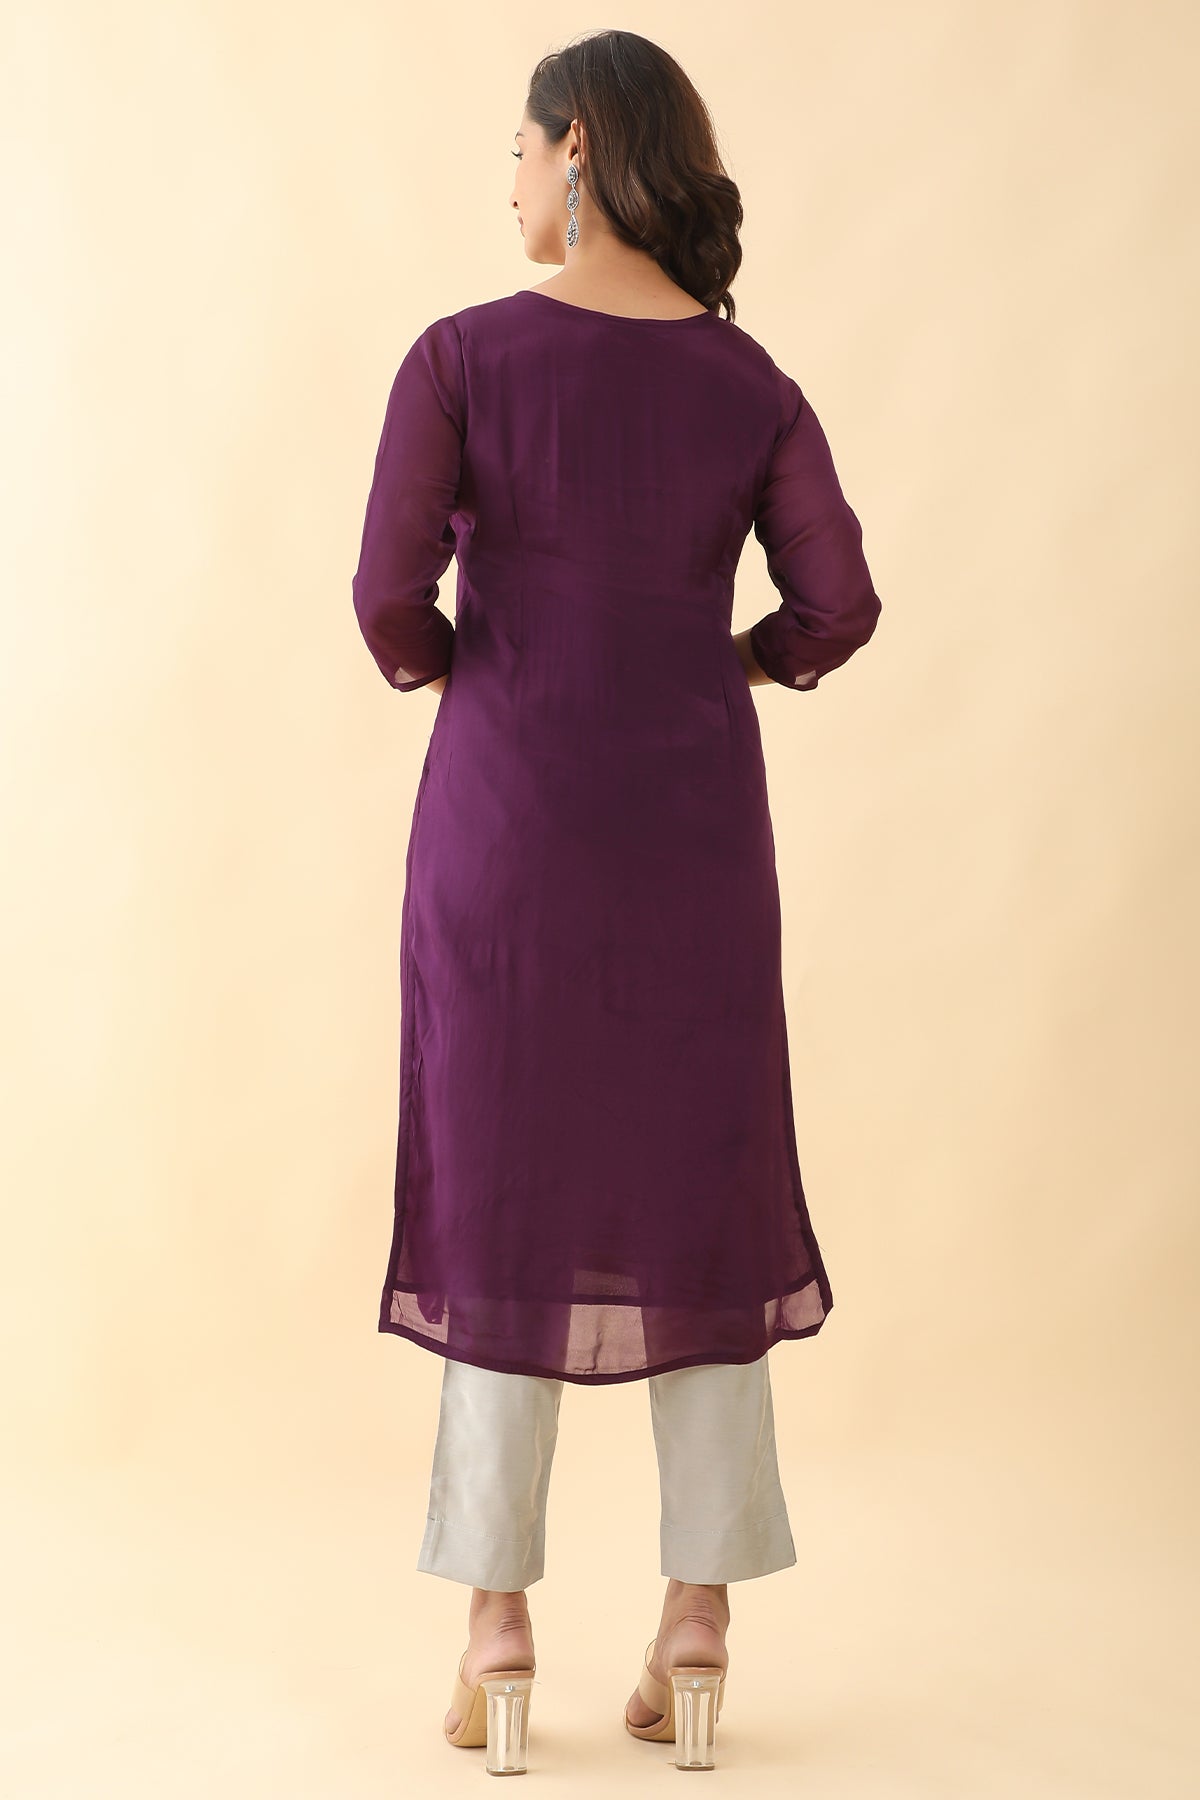 All Over Floral Embroidered With Foil Mirror Embellished Kurta - Purple